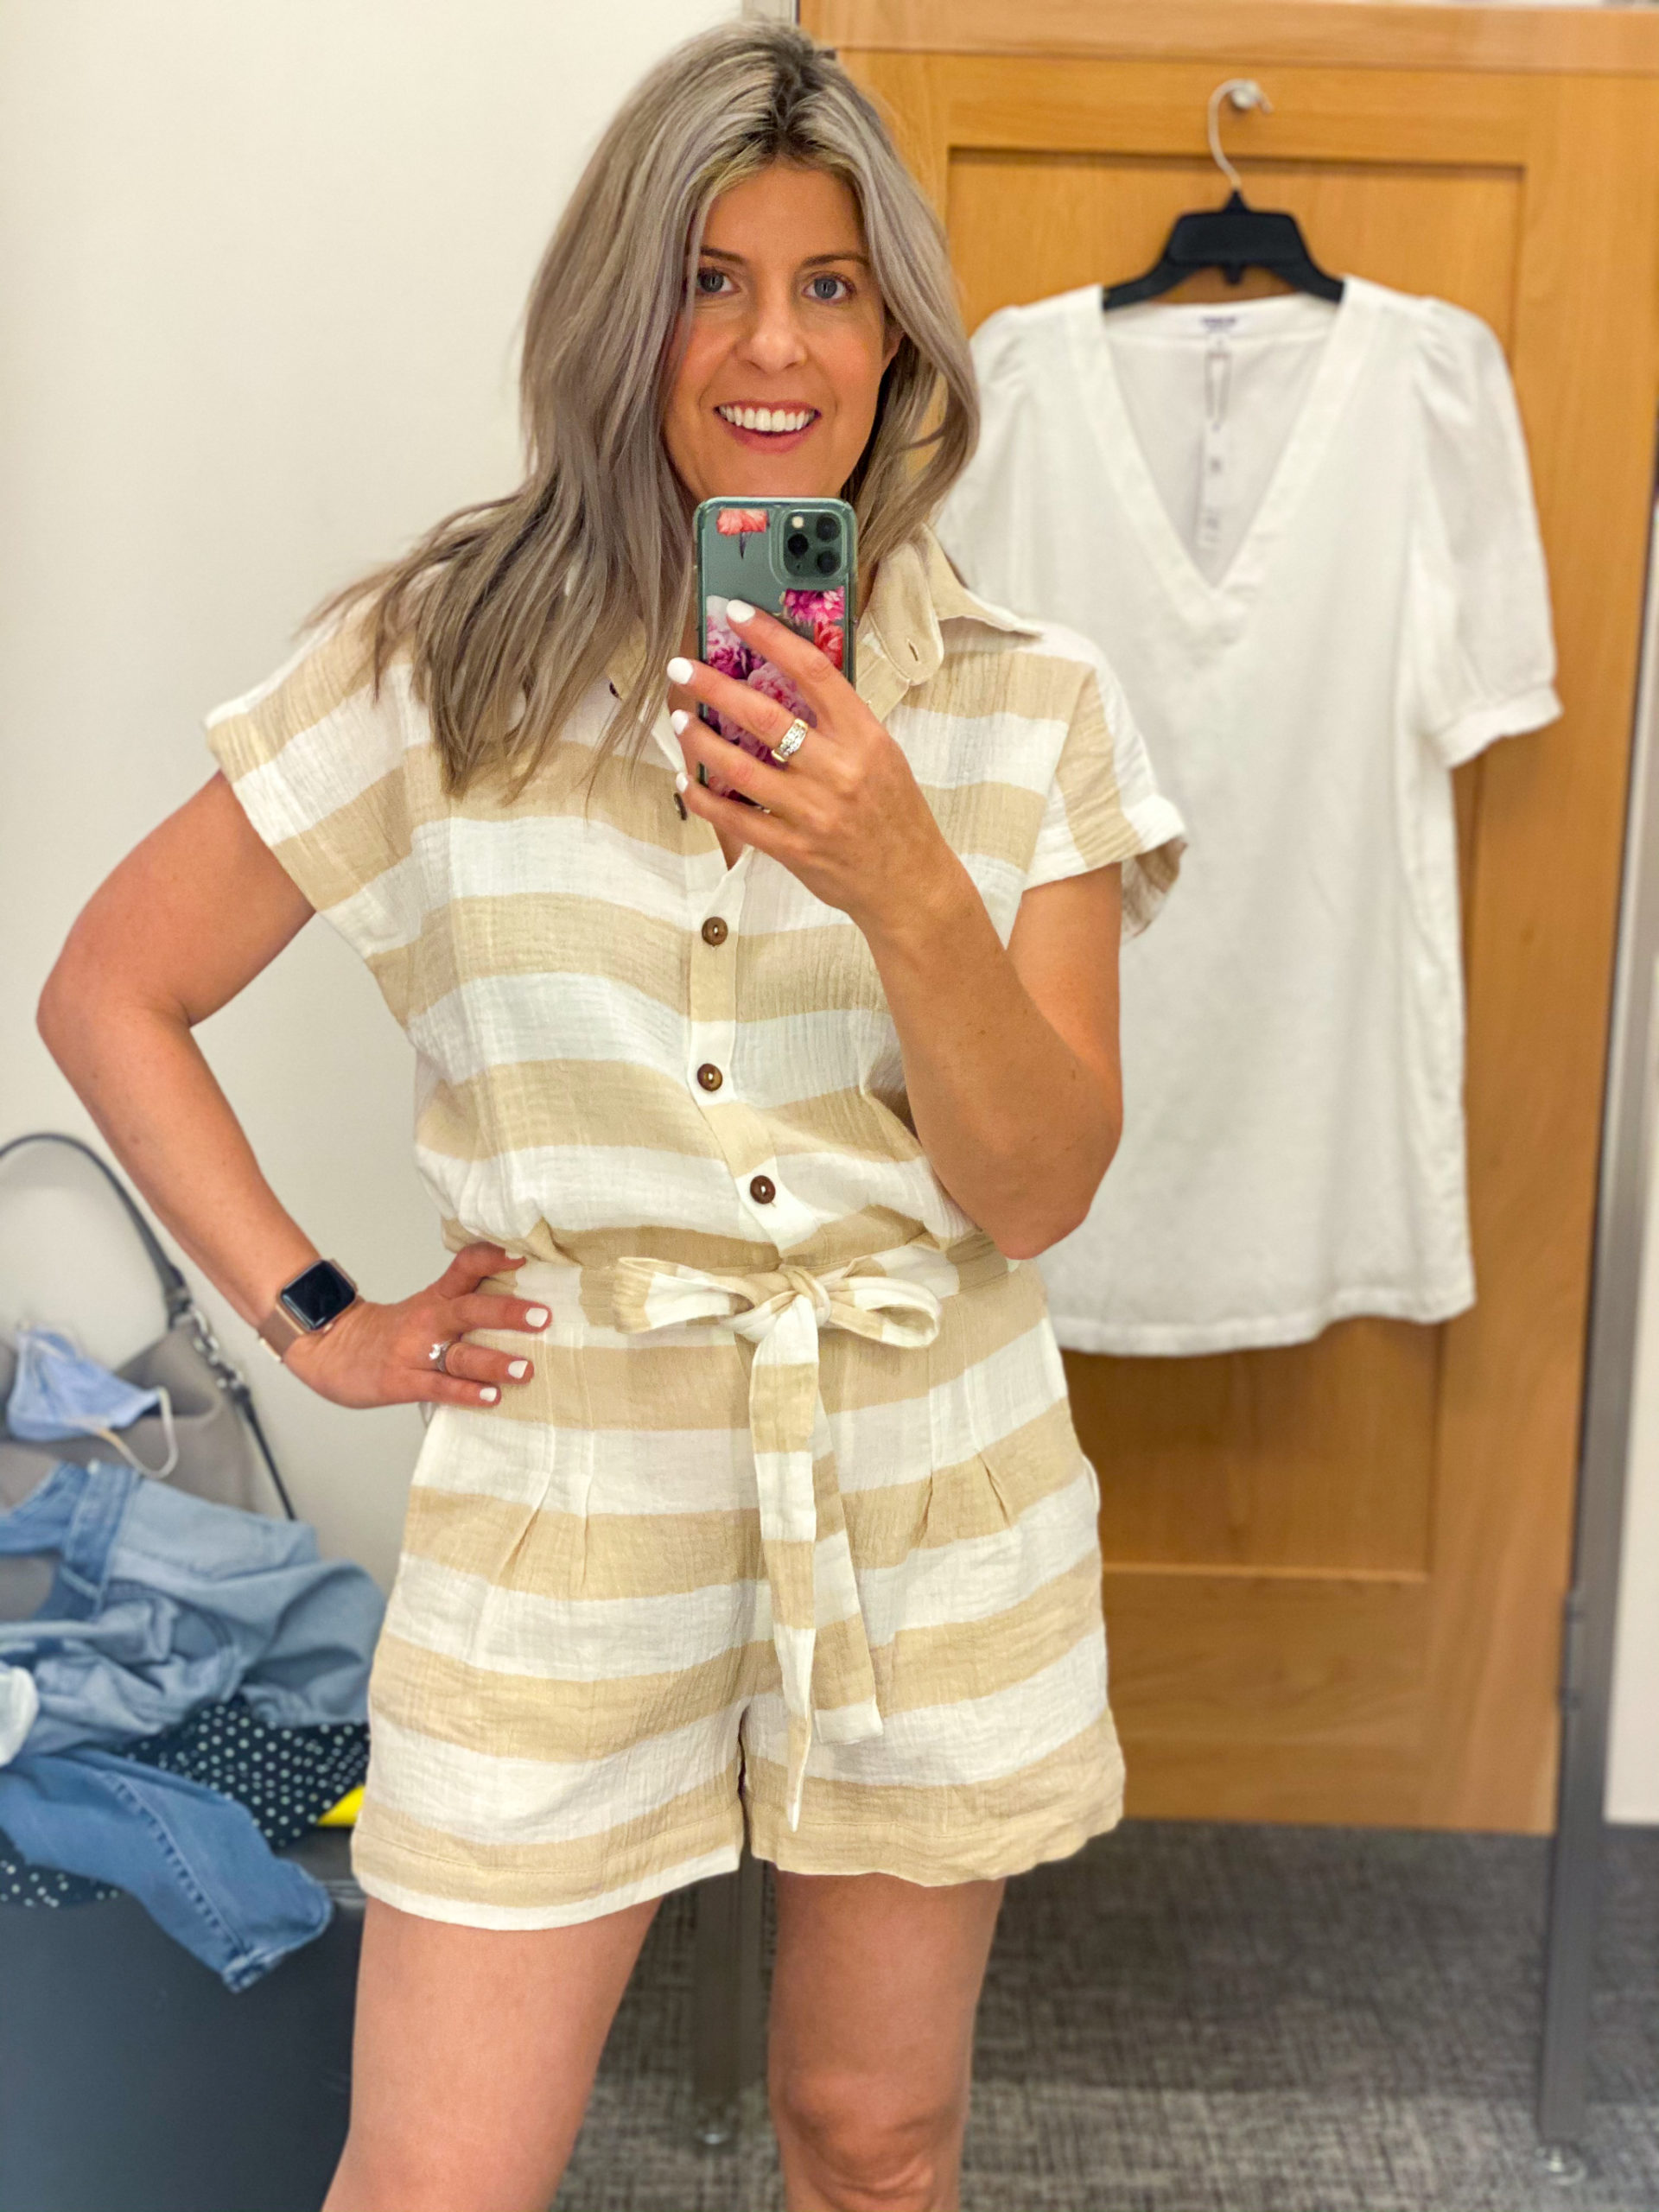 That Time I Went to Nordstrom in Search of a Party Dress · Abby Savvy